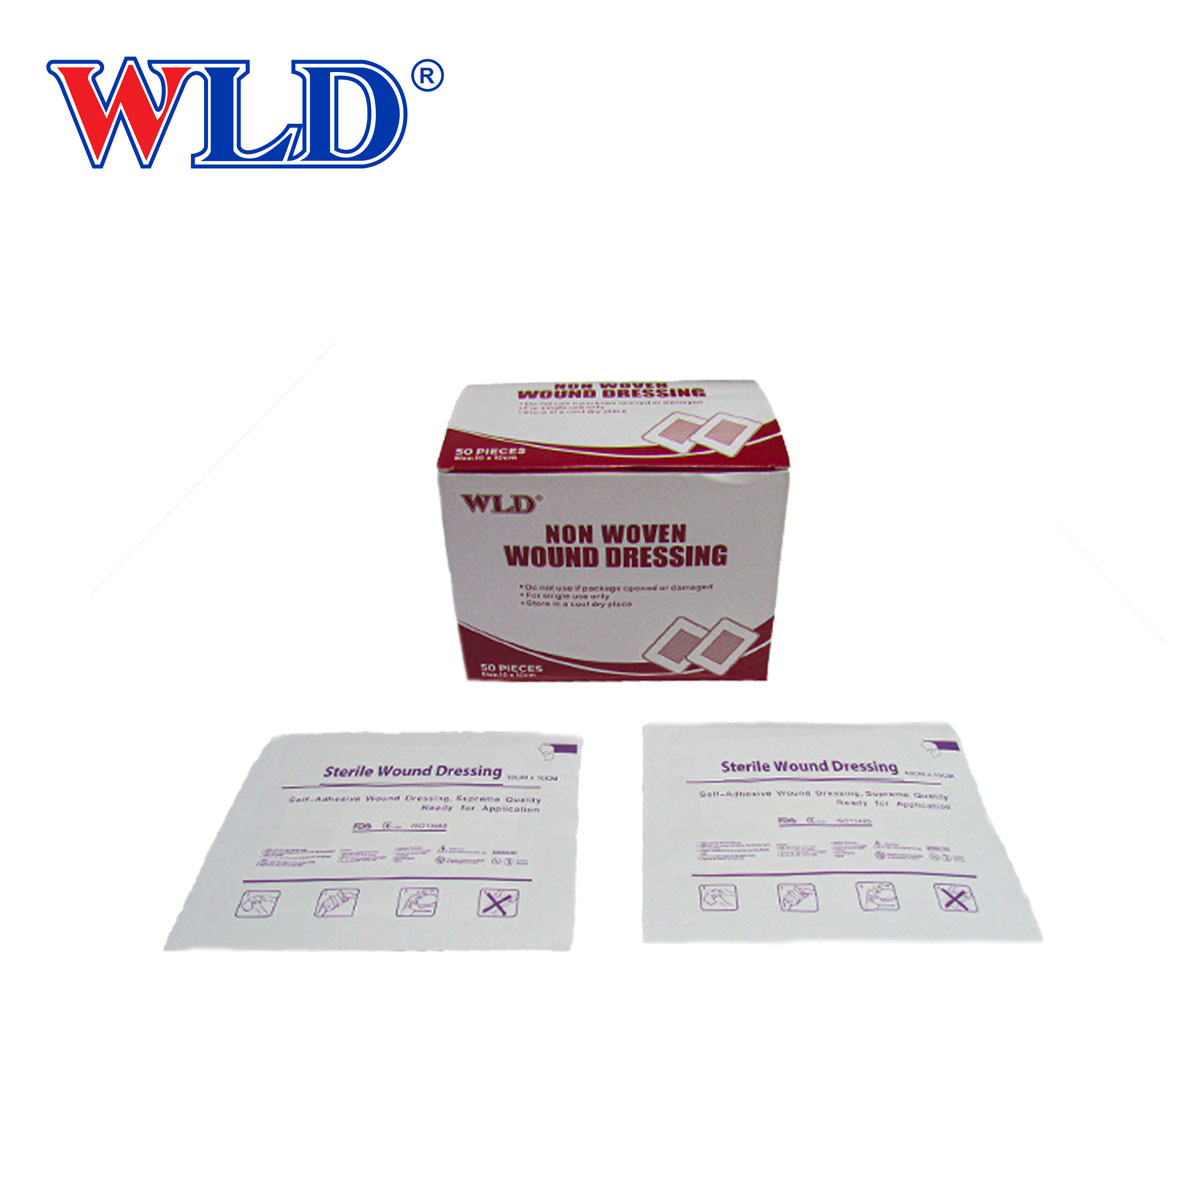 non woven wound dressing2